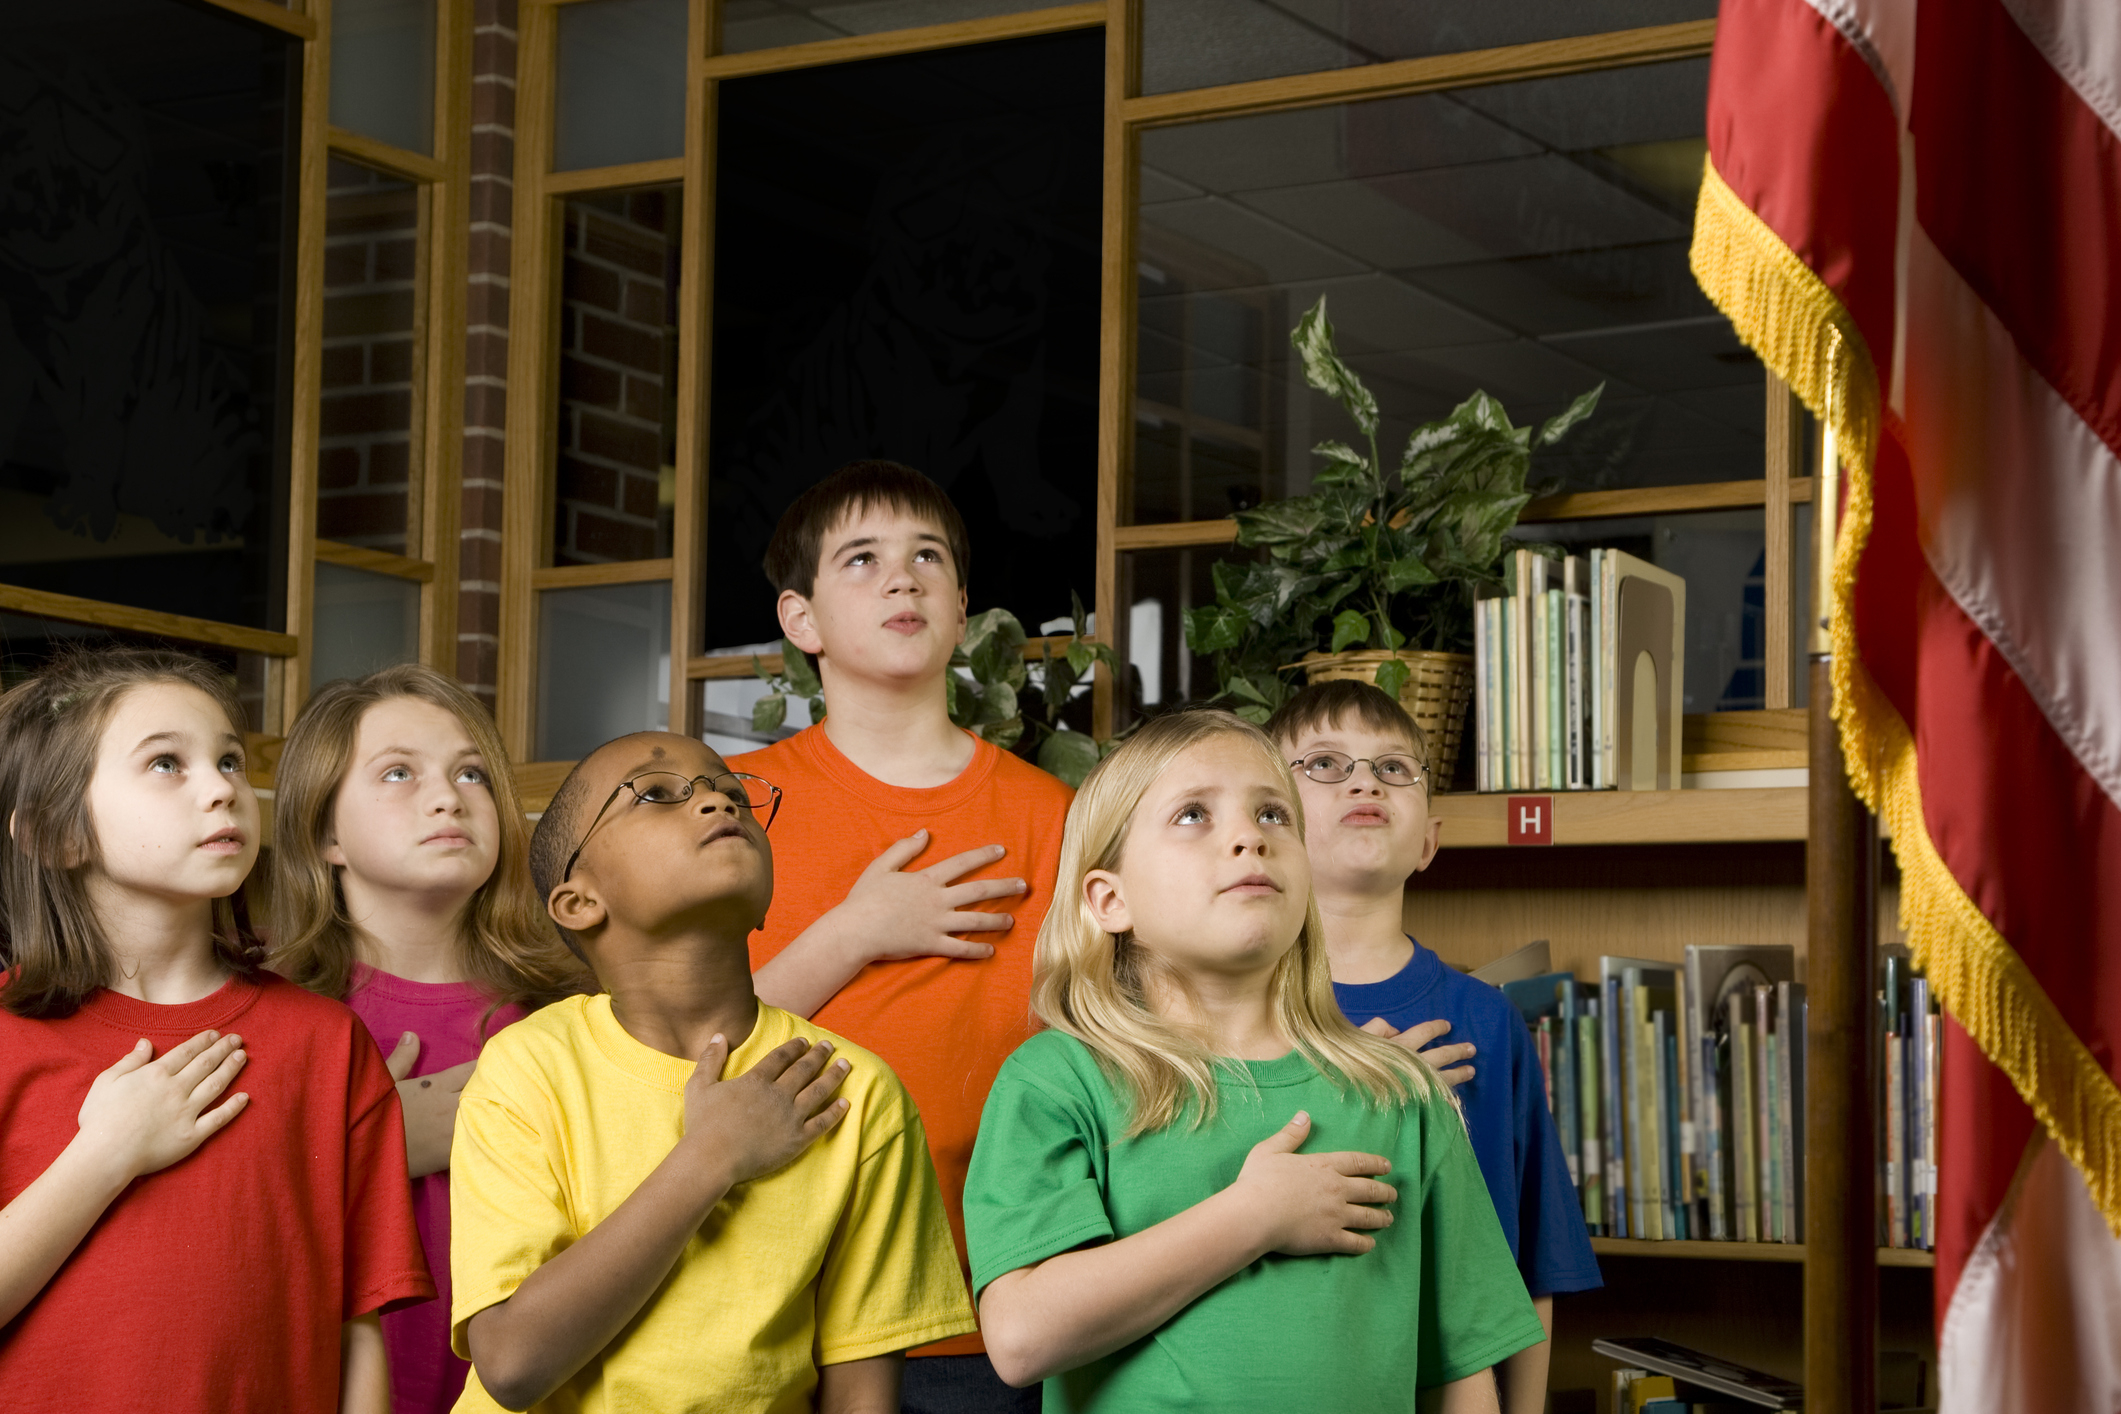 Group of children standing with hands over hearts looking upward in a library setting